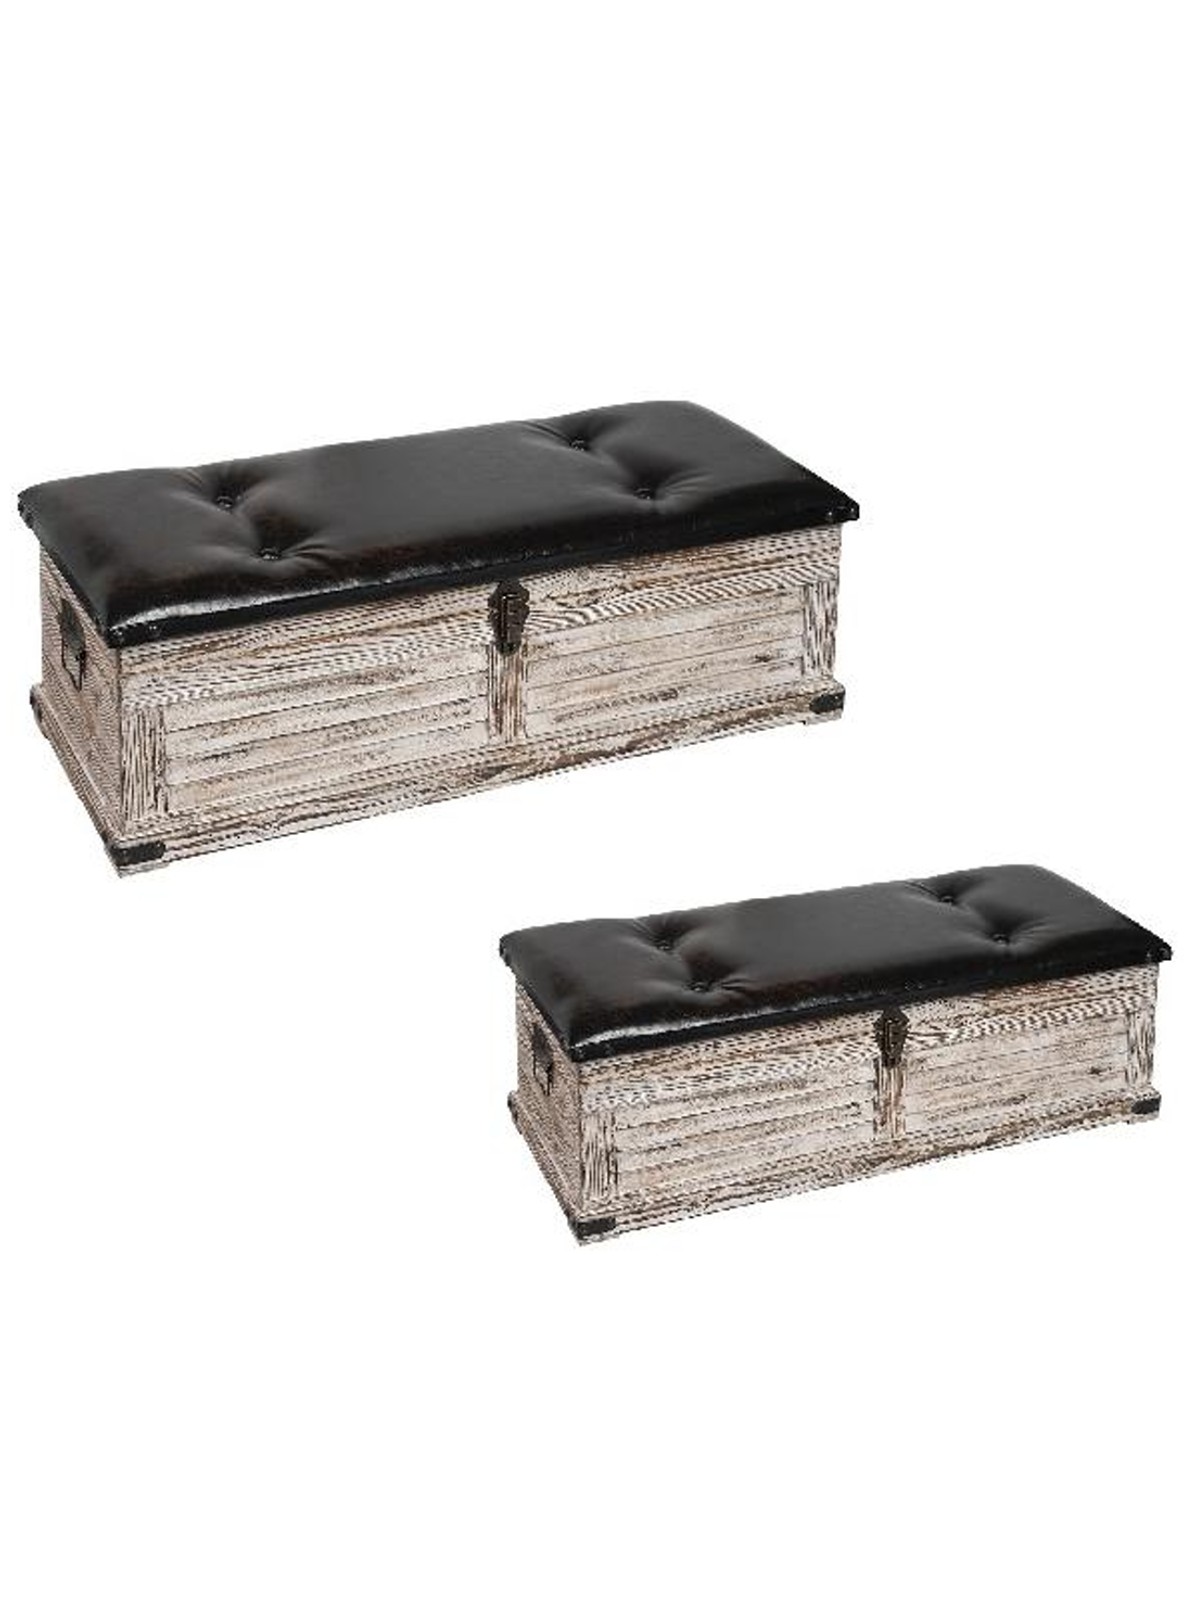 Wooden trunk with leatherette pillow